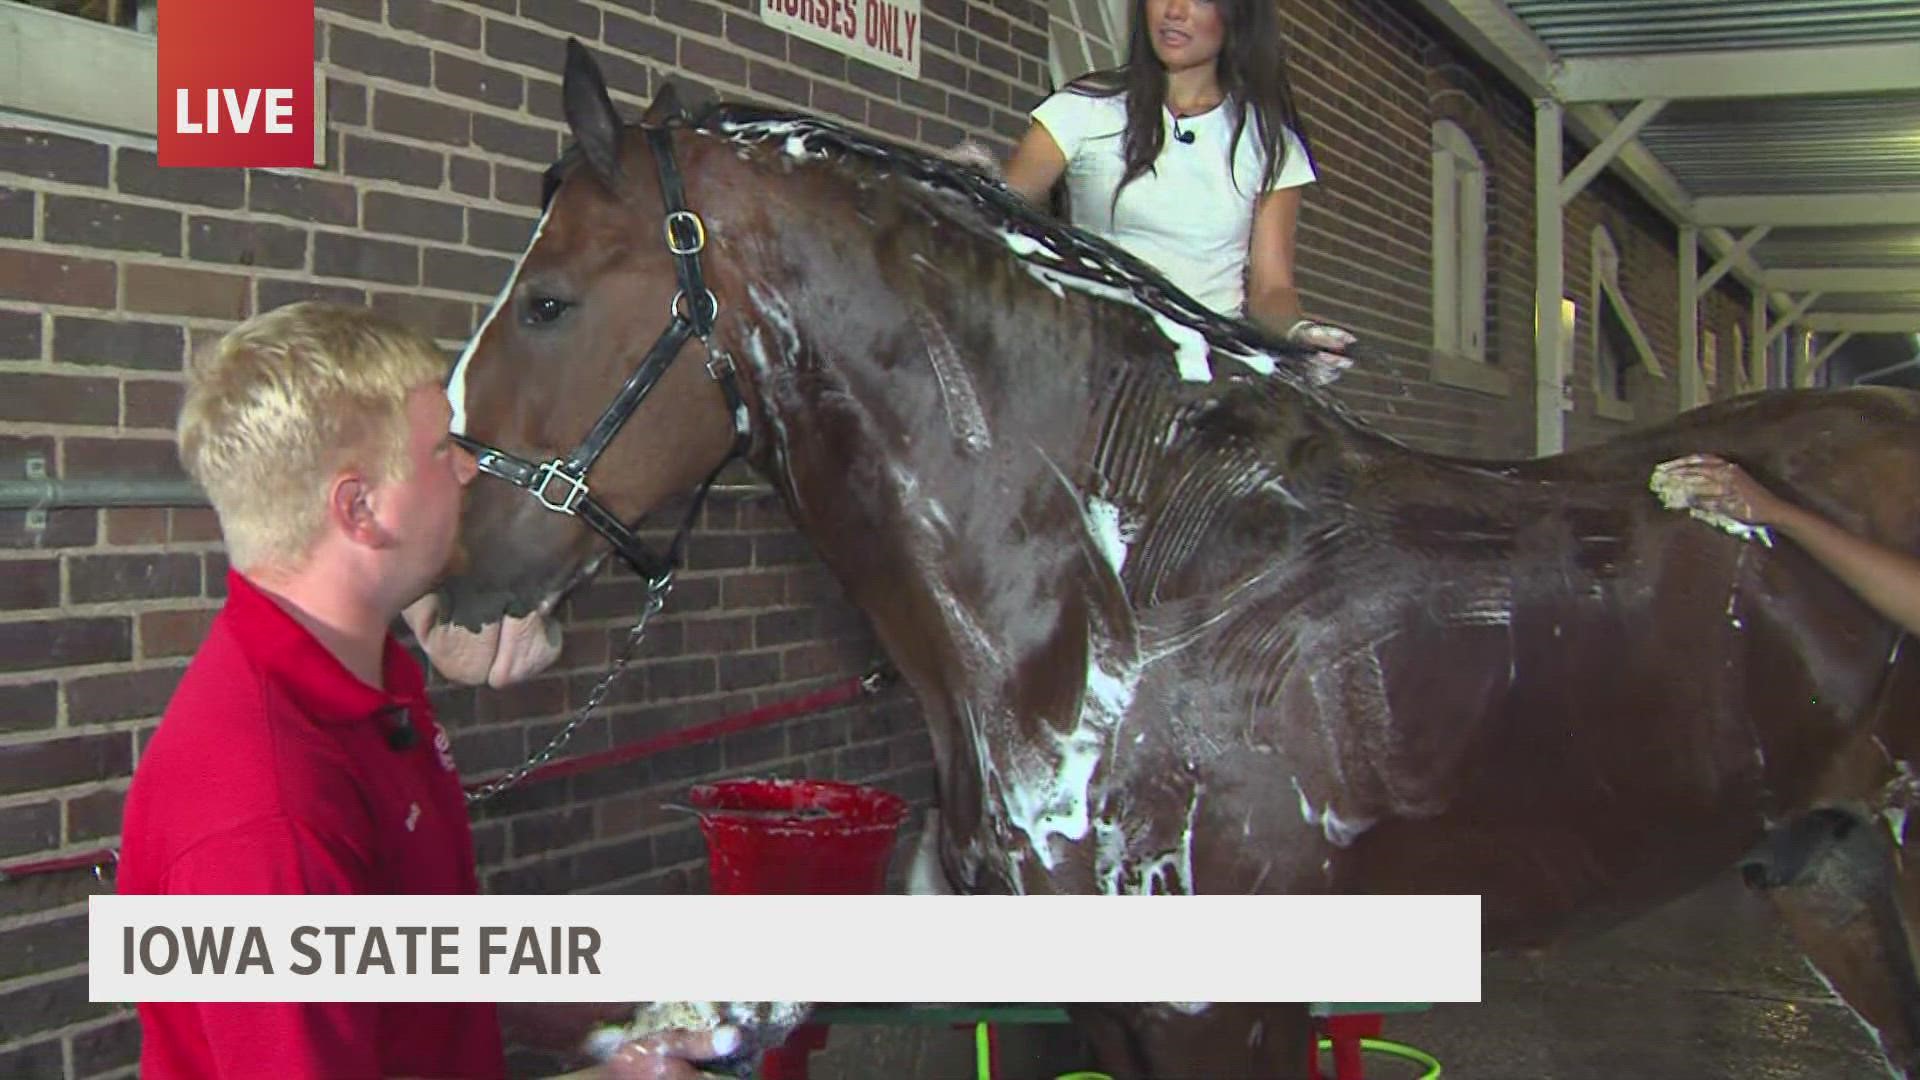 Local 5's news team cleaned a Budweiser Clydesdale horse, to see what it's like to get the horse ready for their parade around the fair.